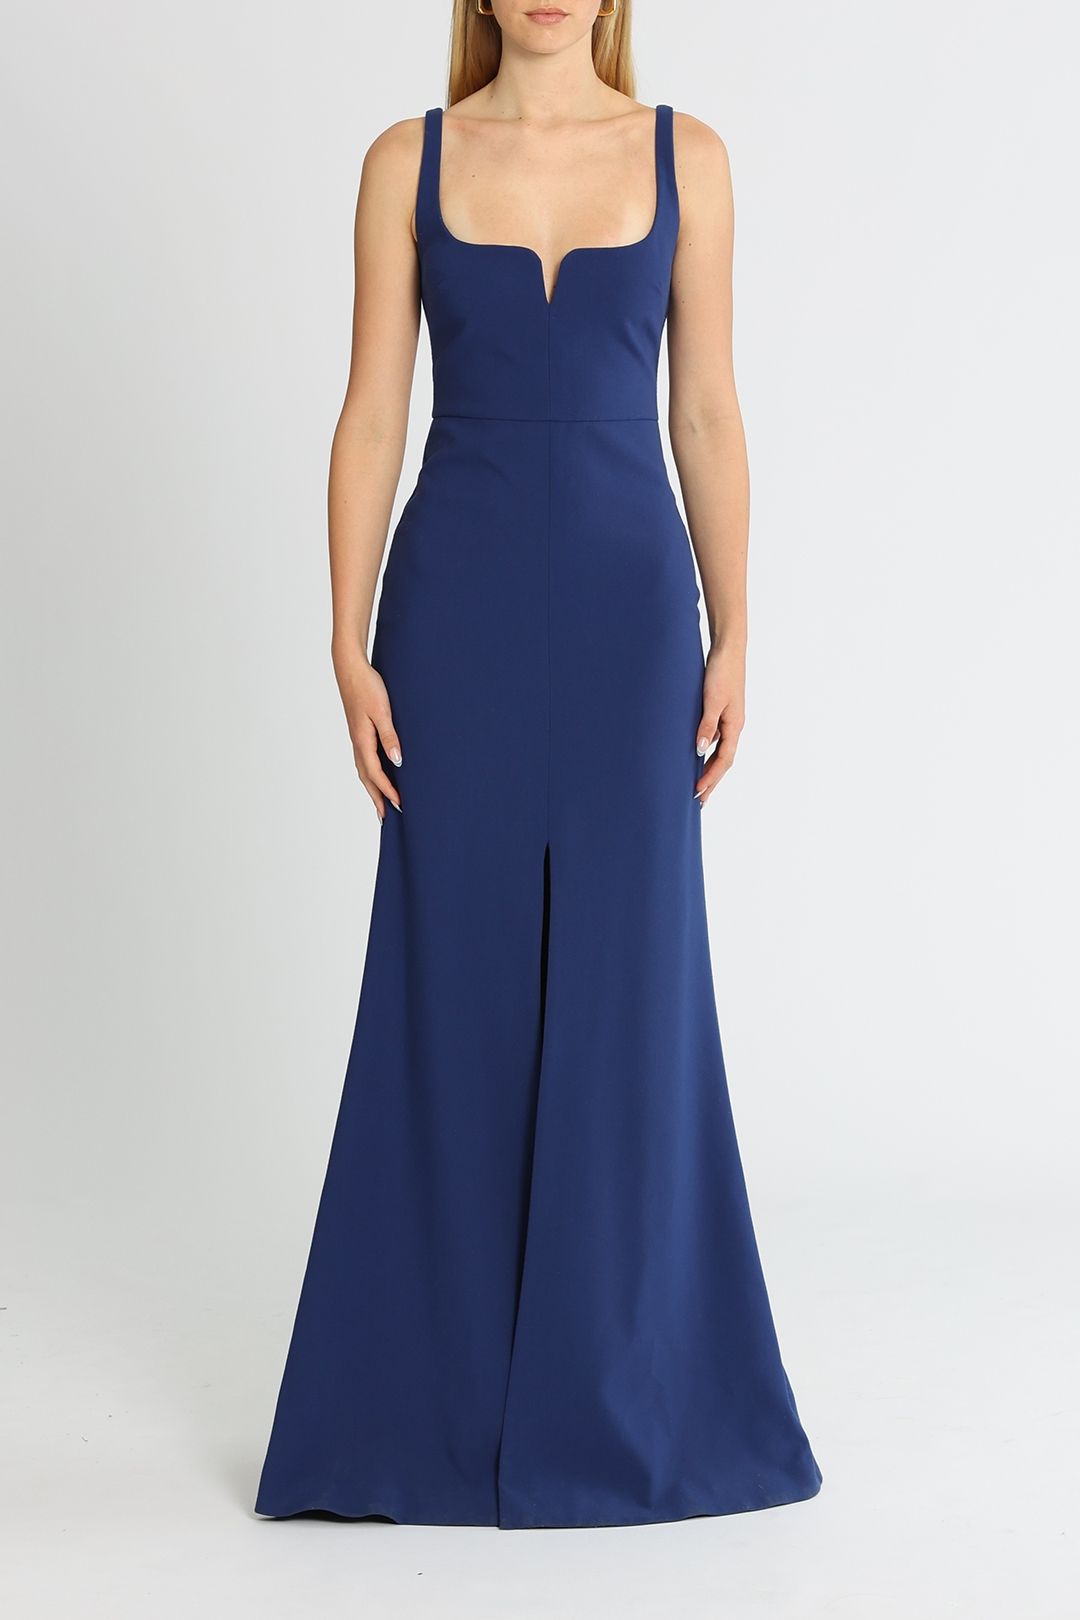 Likely NYC Constance Gown Navy